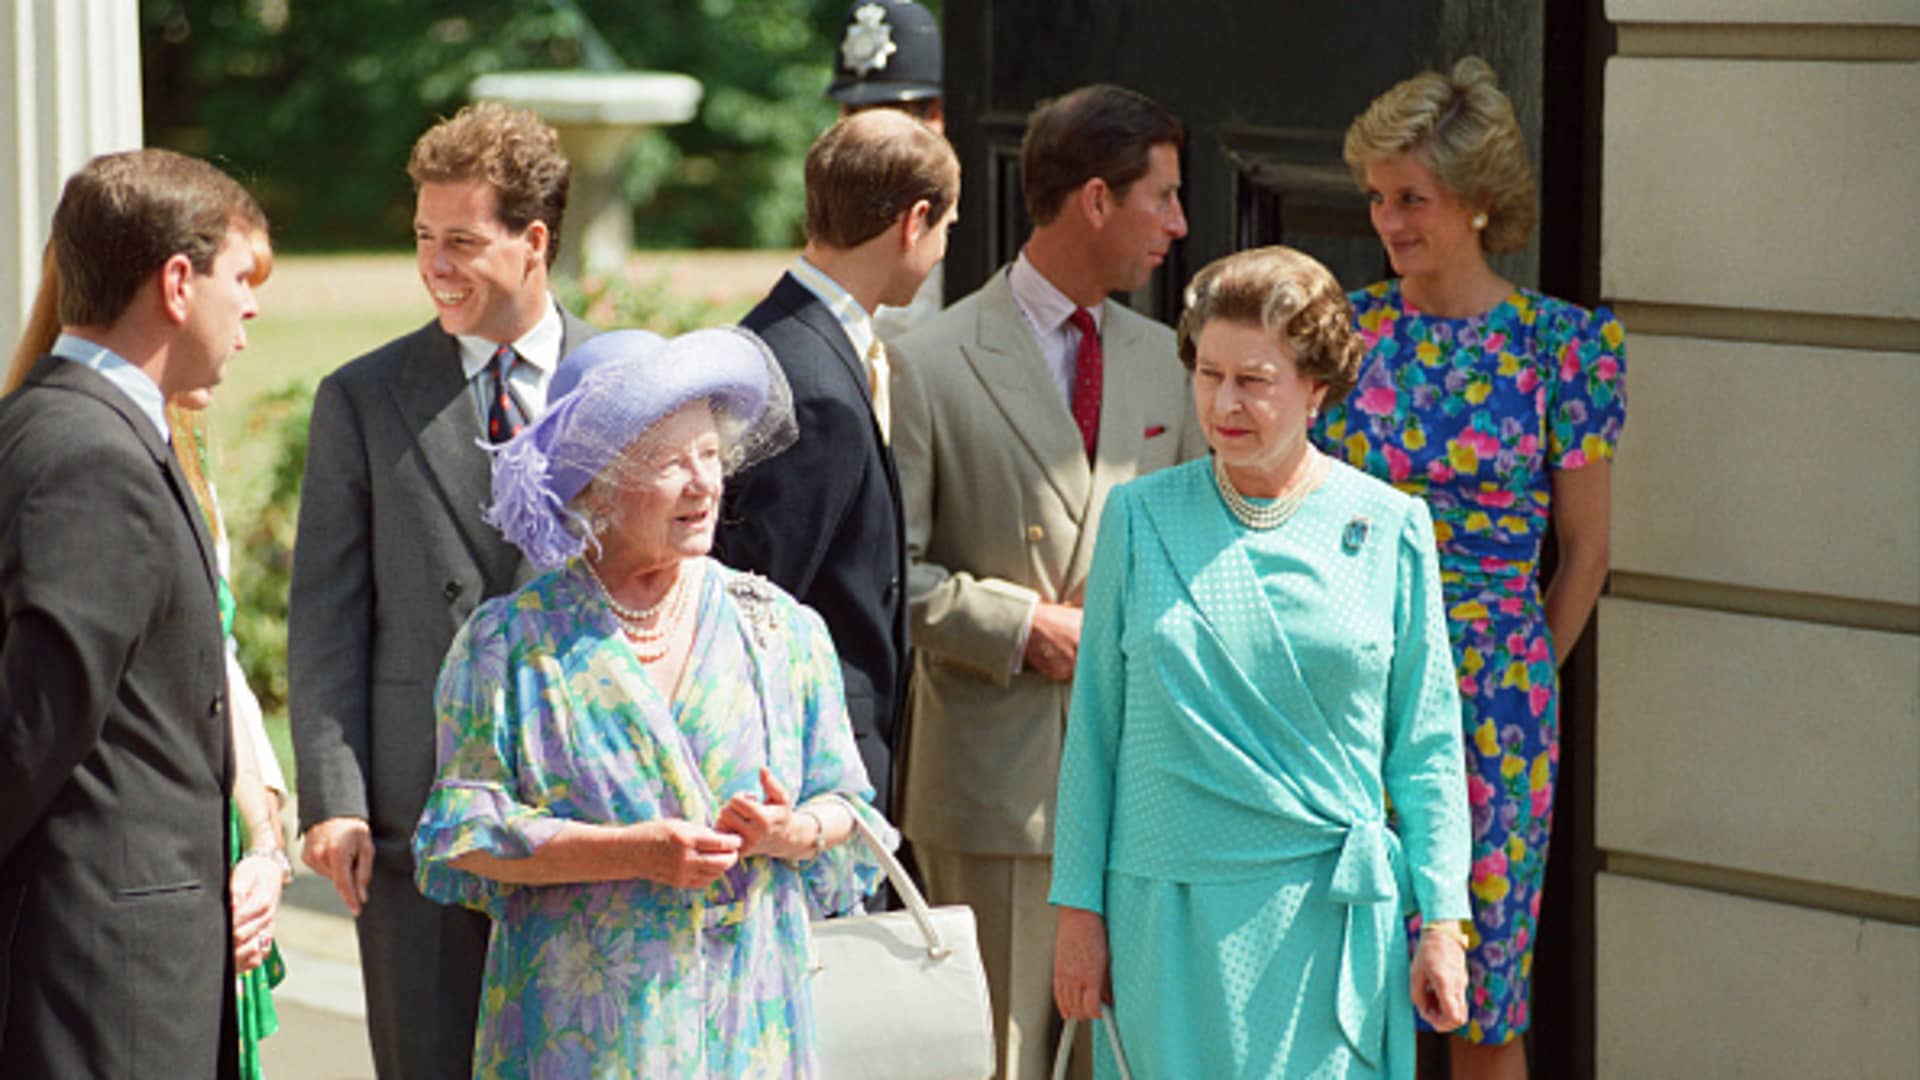 The Royal Family standing outside Clarence House on the 89th Birthday of the Queen Mother including Prince Andrew the Duke of York, Queen Elizabeth II, Prince Charles, Princess Diana, Sarah Ferguson the Duchess of York, Prince Edward and Zara Phillips. 4th August 1989.